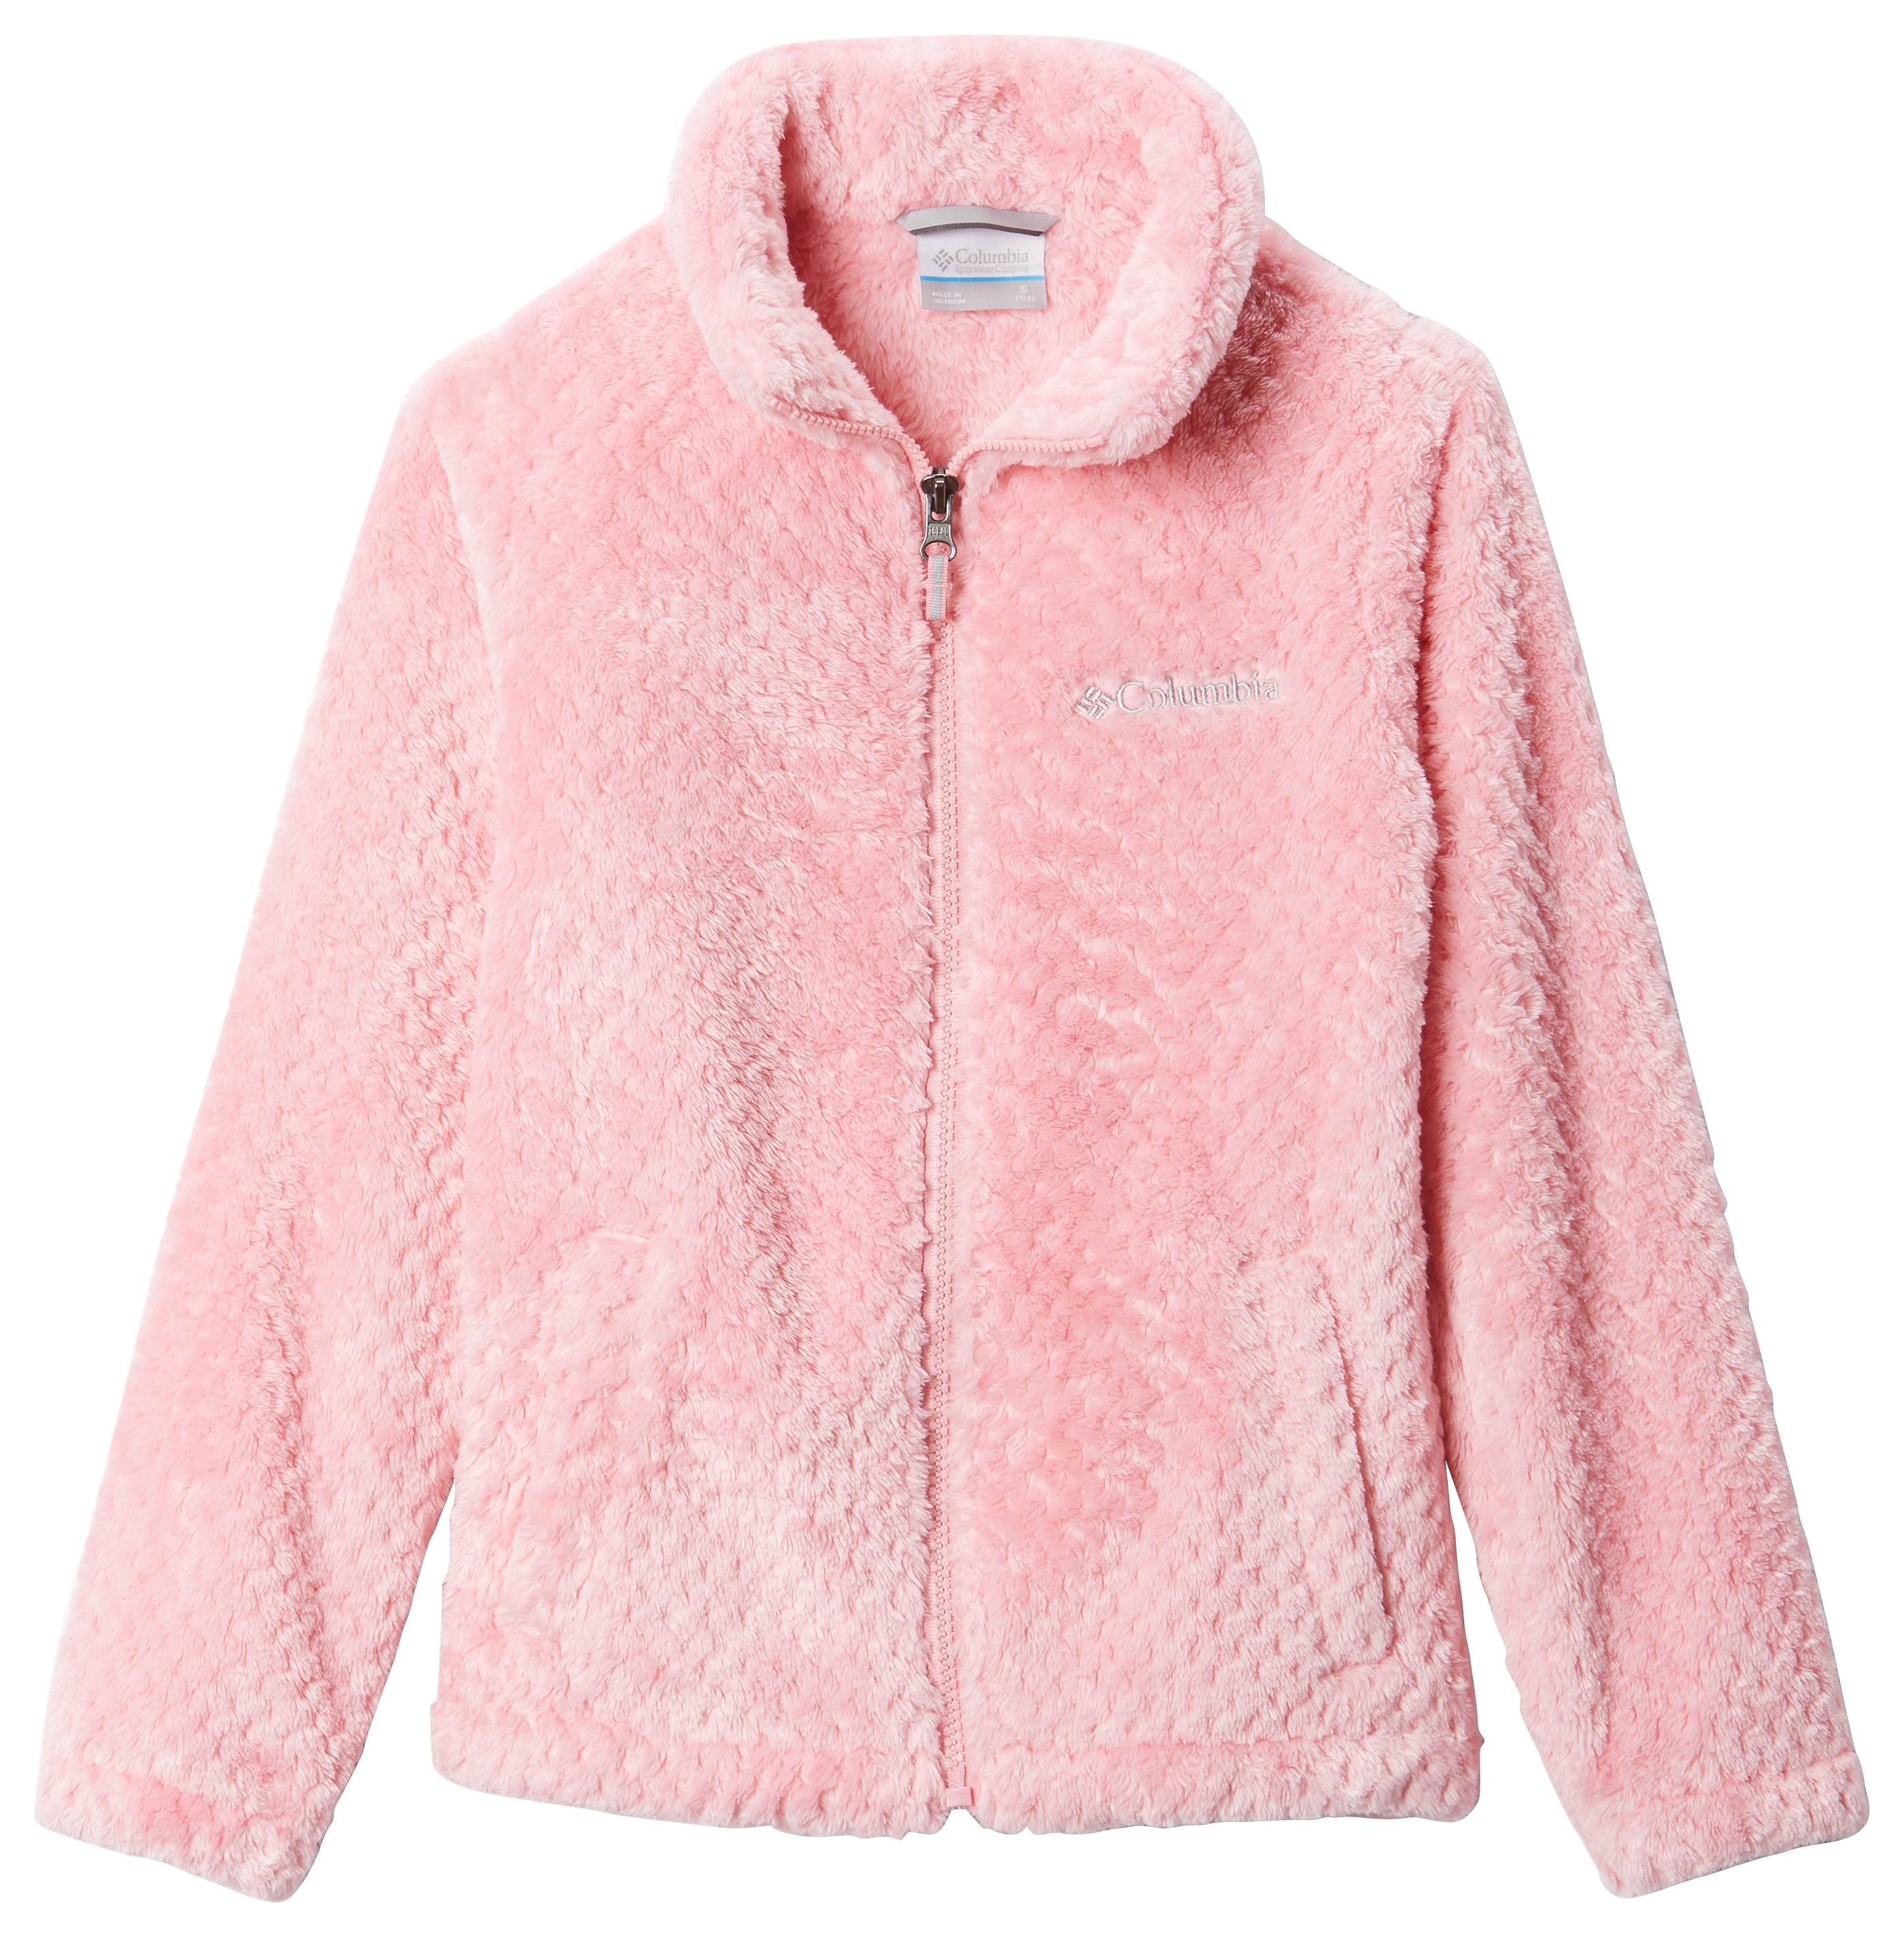 Side Kids for Fire or Pro Shops | Bass Sherpa Jacket Columbia Toddlers Full-Zip